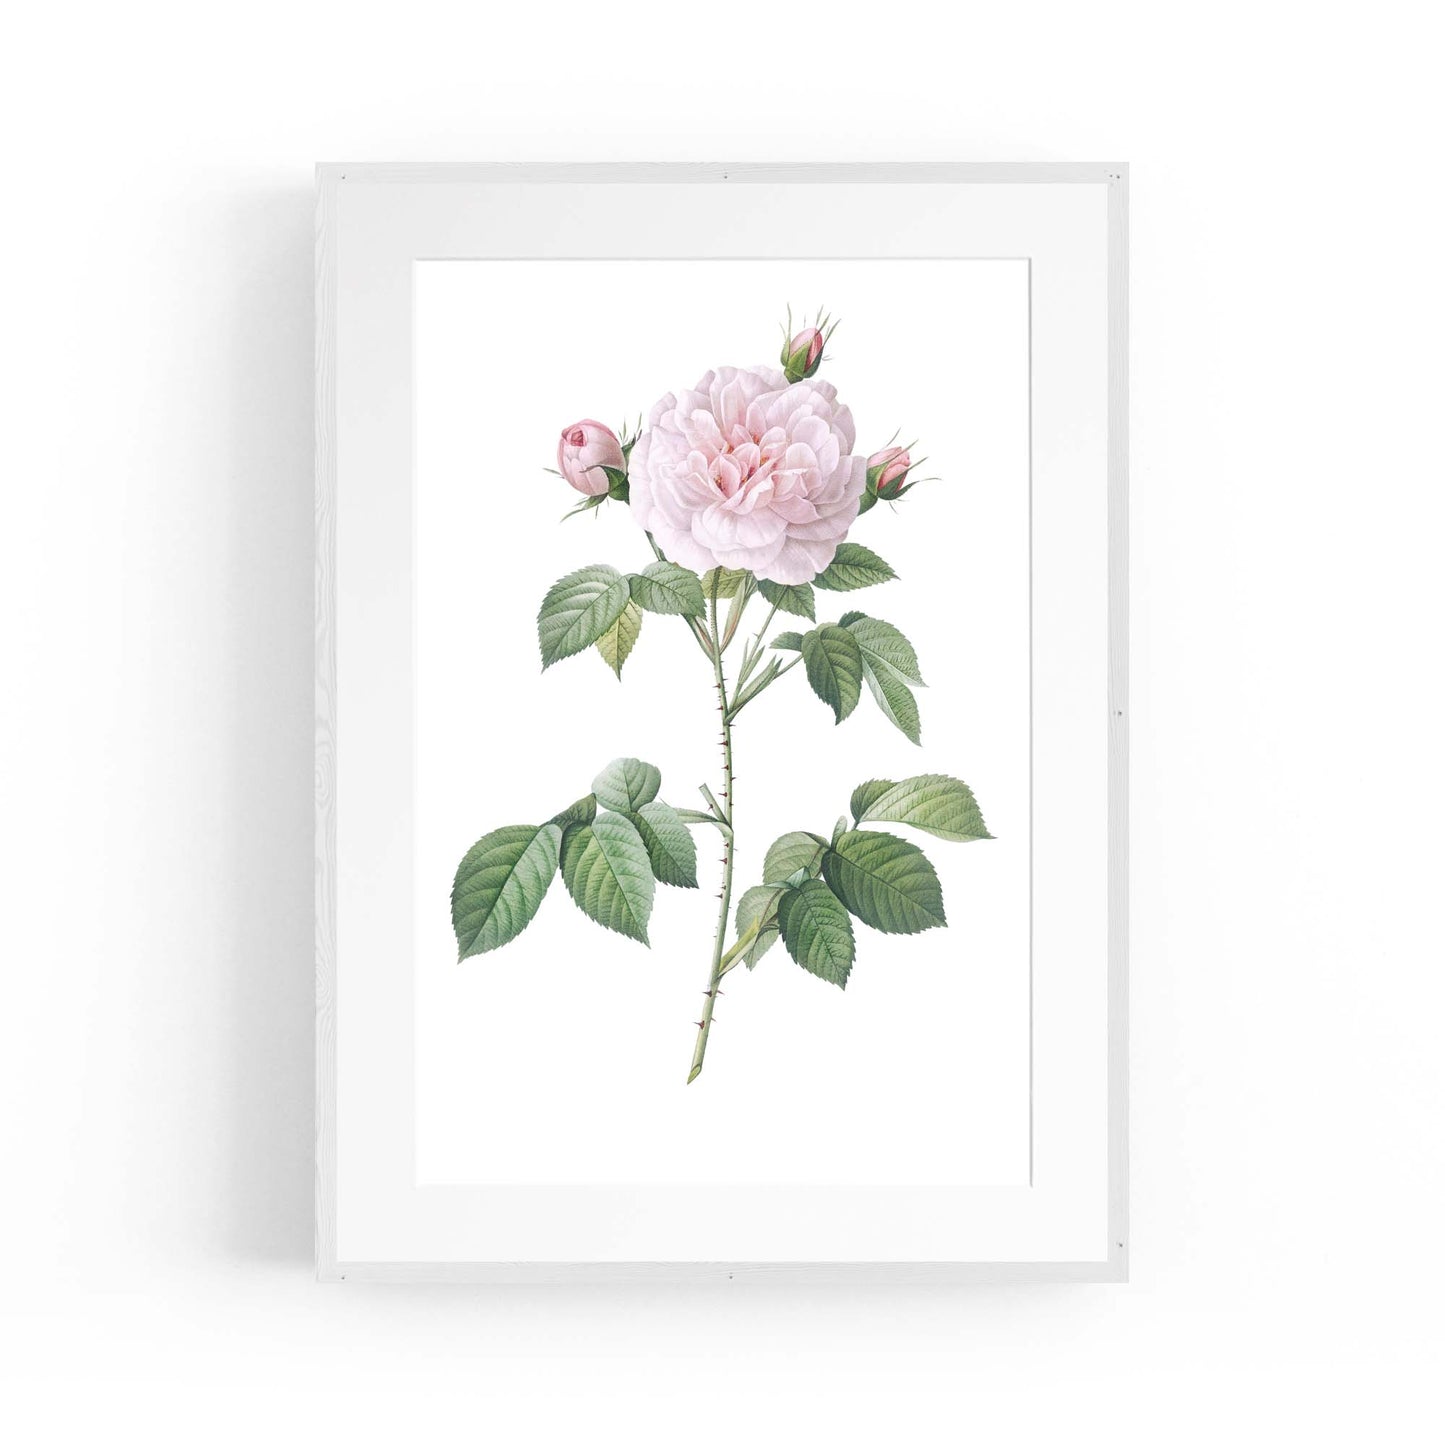 Flower Botanical Painting Kitchen Hallway Wall Art #11 - The Affordable Art Company